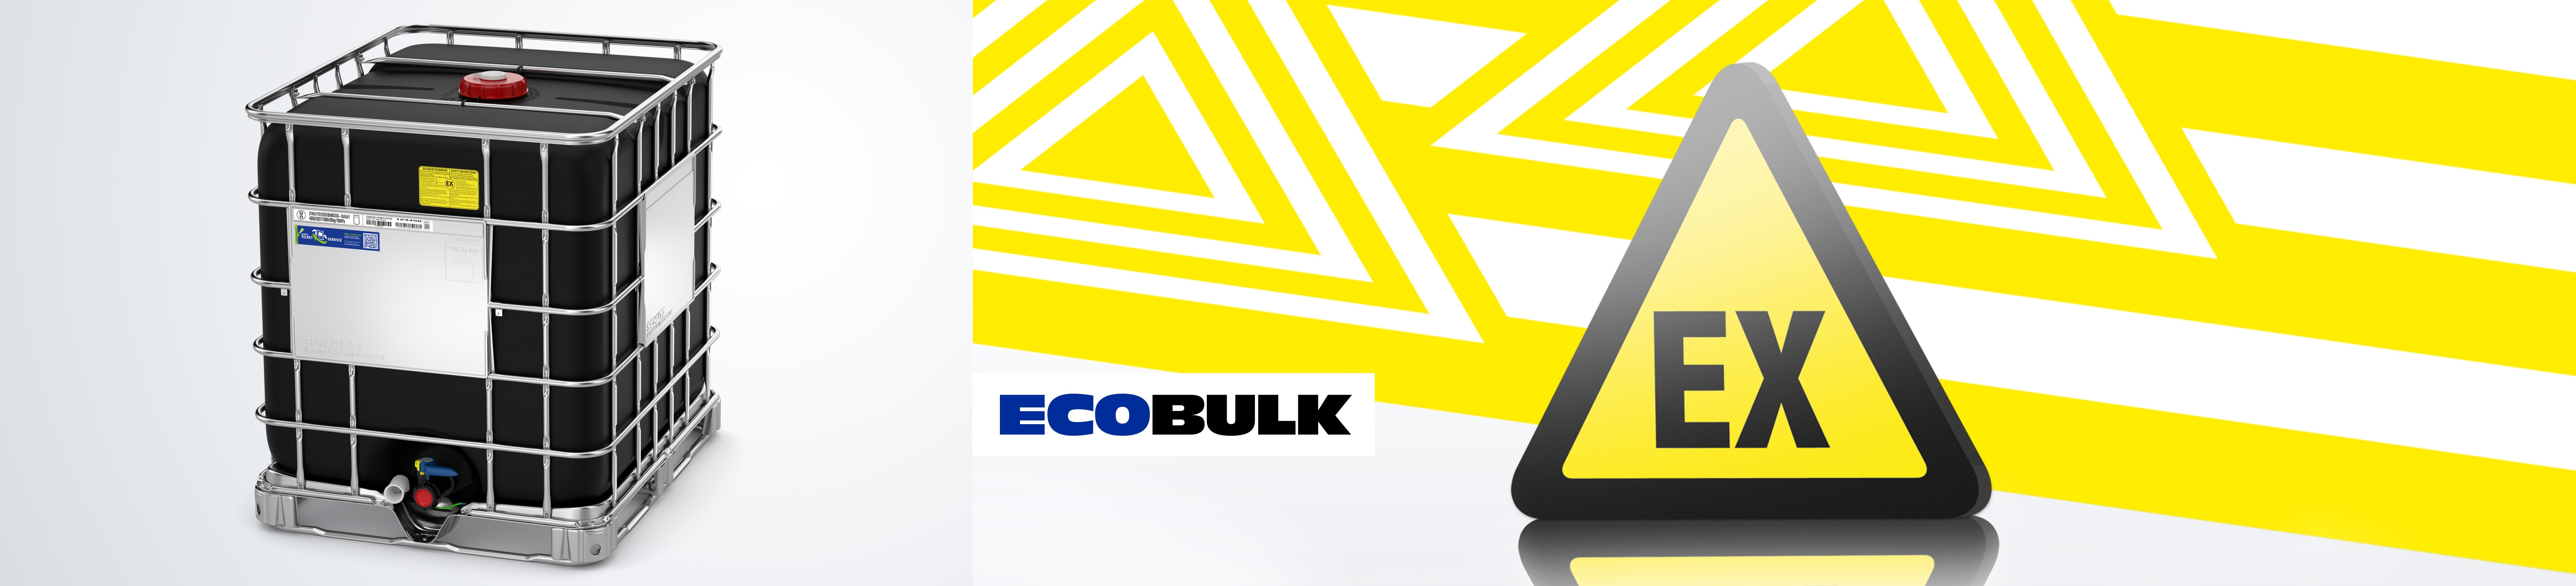 ECOBULK MX-EX conductive | PACKAGING SYSTEMS